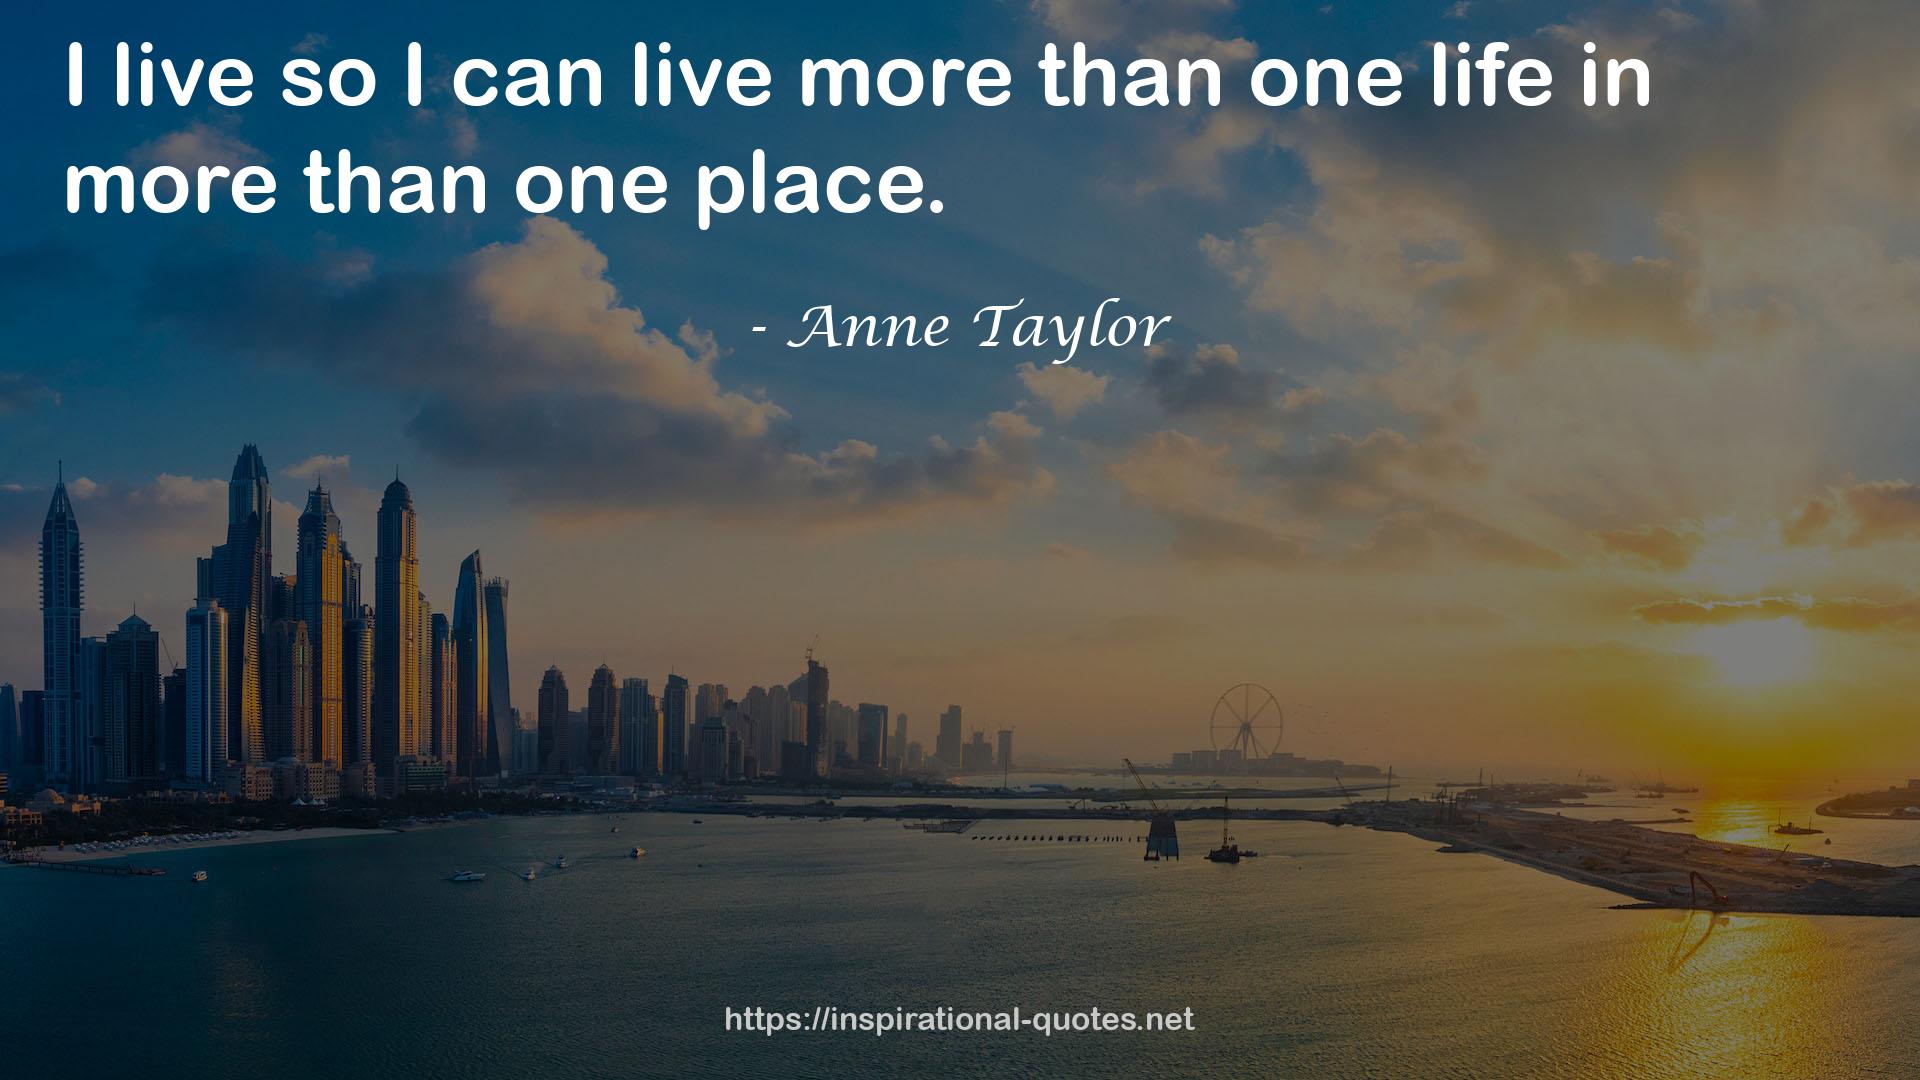 Anne Taylor QUOTES